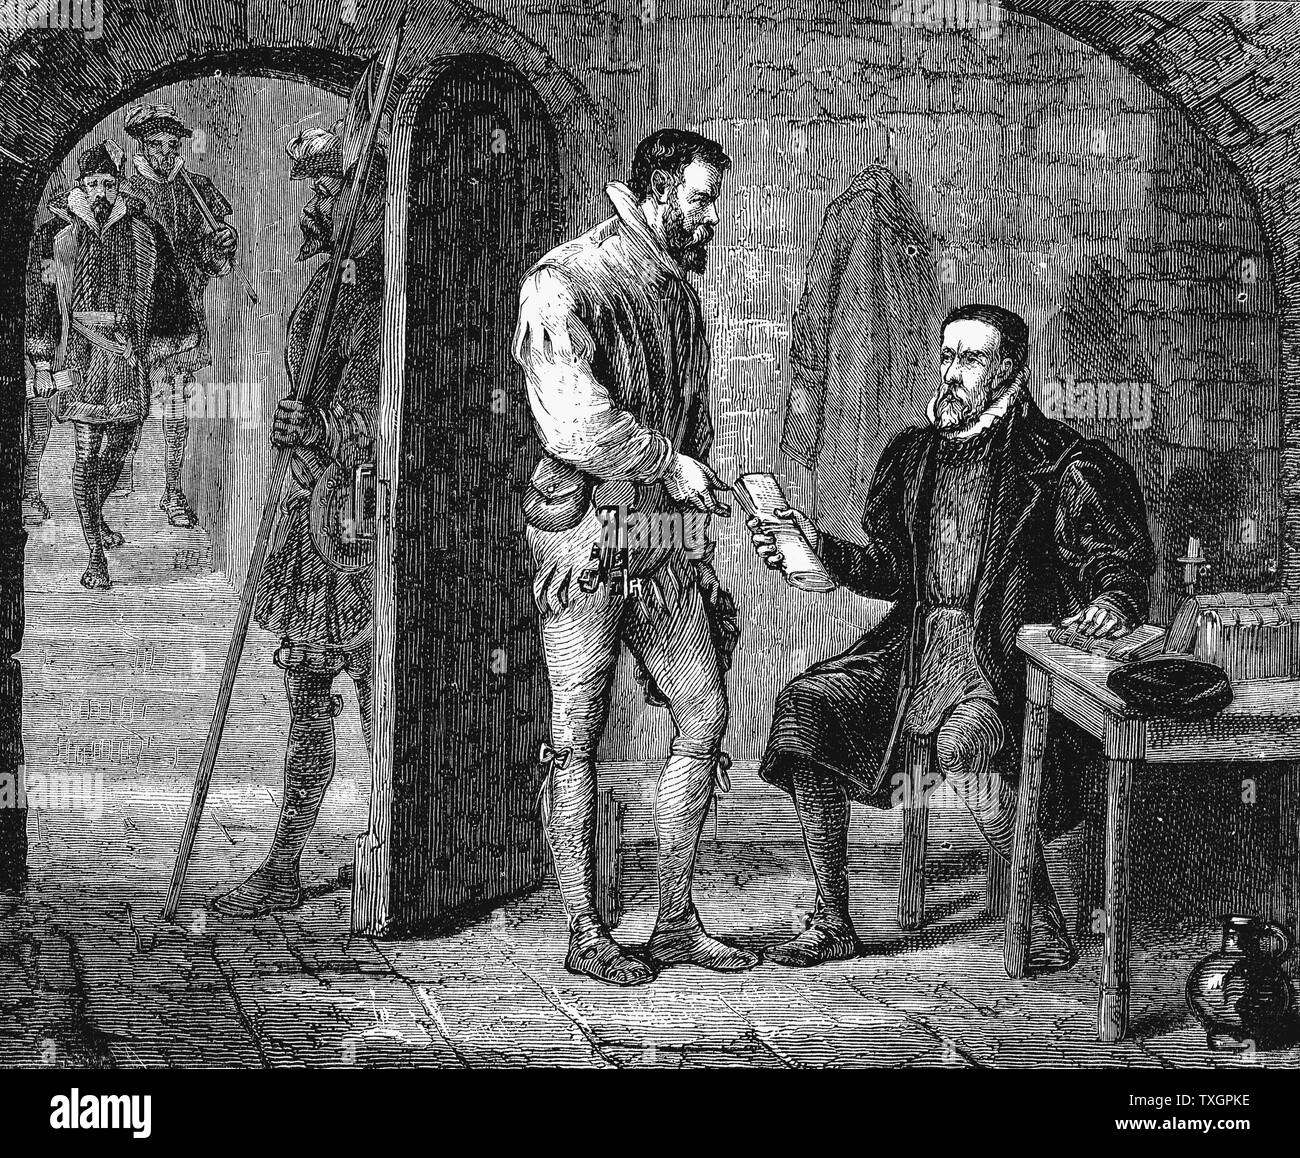 William Tyndale or Tindale (c1494-1536), English translator of the Bible on morning of his death, giving jailer packet for John Rogers (pseud. Thomas Mather) thought to have contained his work on the Old Testament Late 19th century  wood engraving Stock Photo